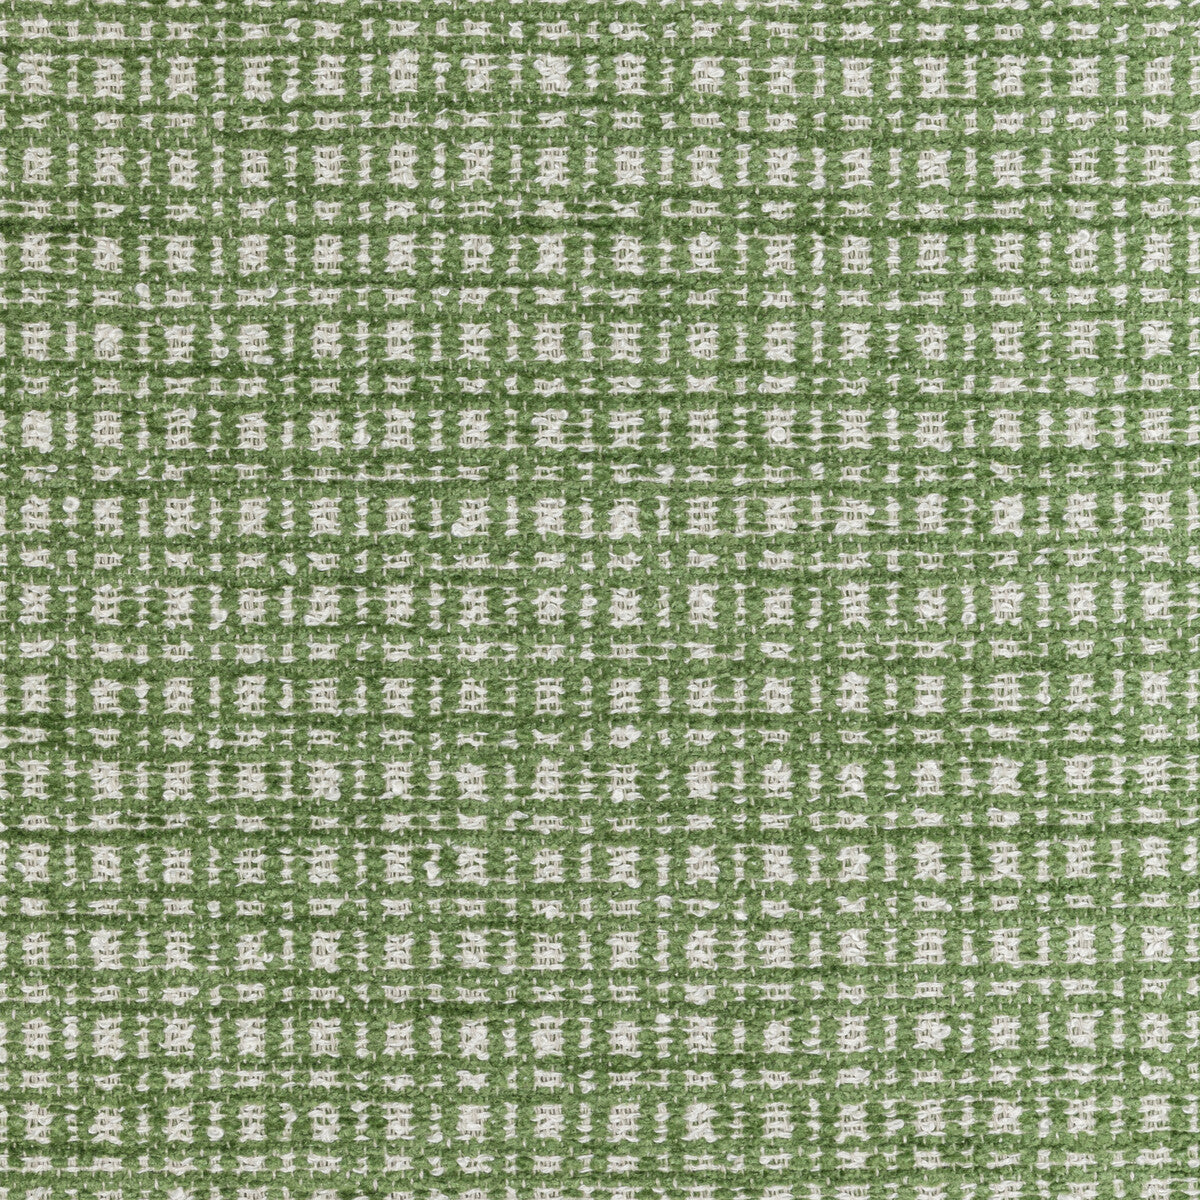 Landiers Texture fabric in green color - pattern 8022123.3.0 - by Brunschwig &amp; Fils in the Chambery Textures III collection